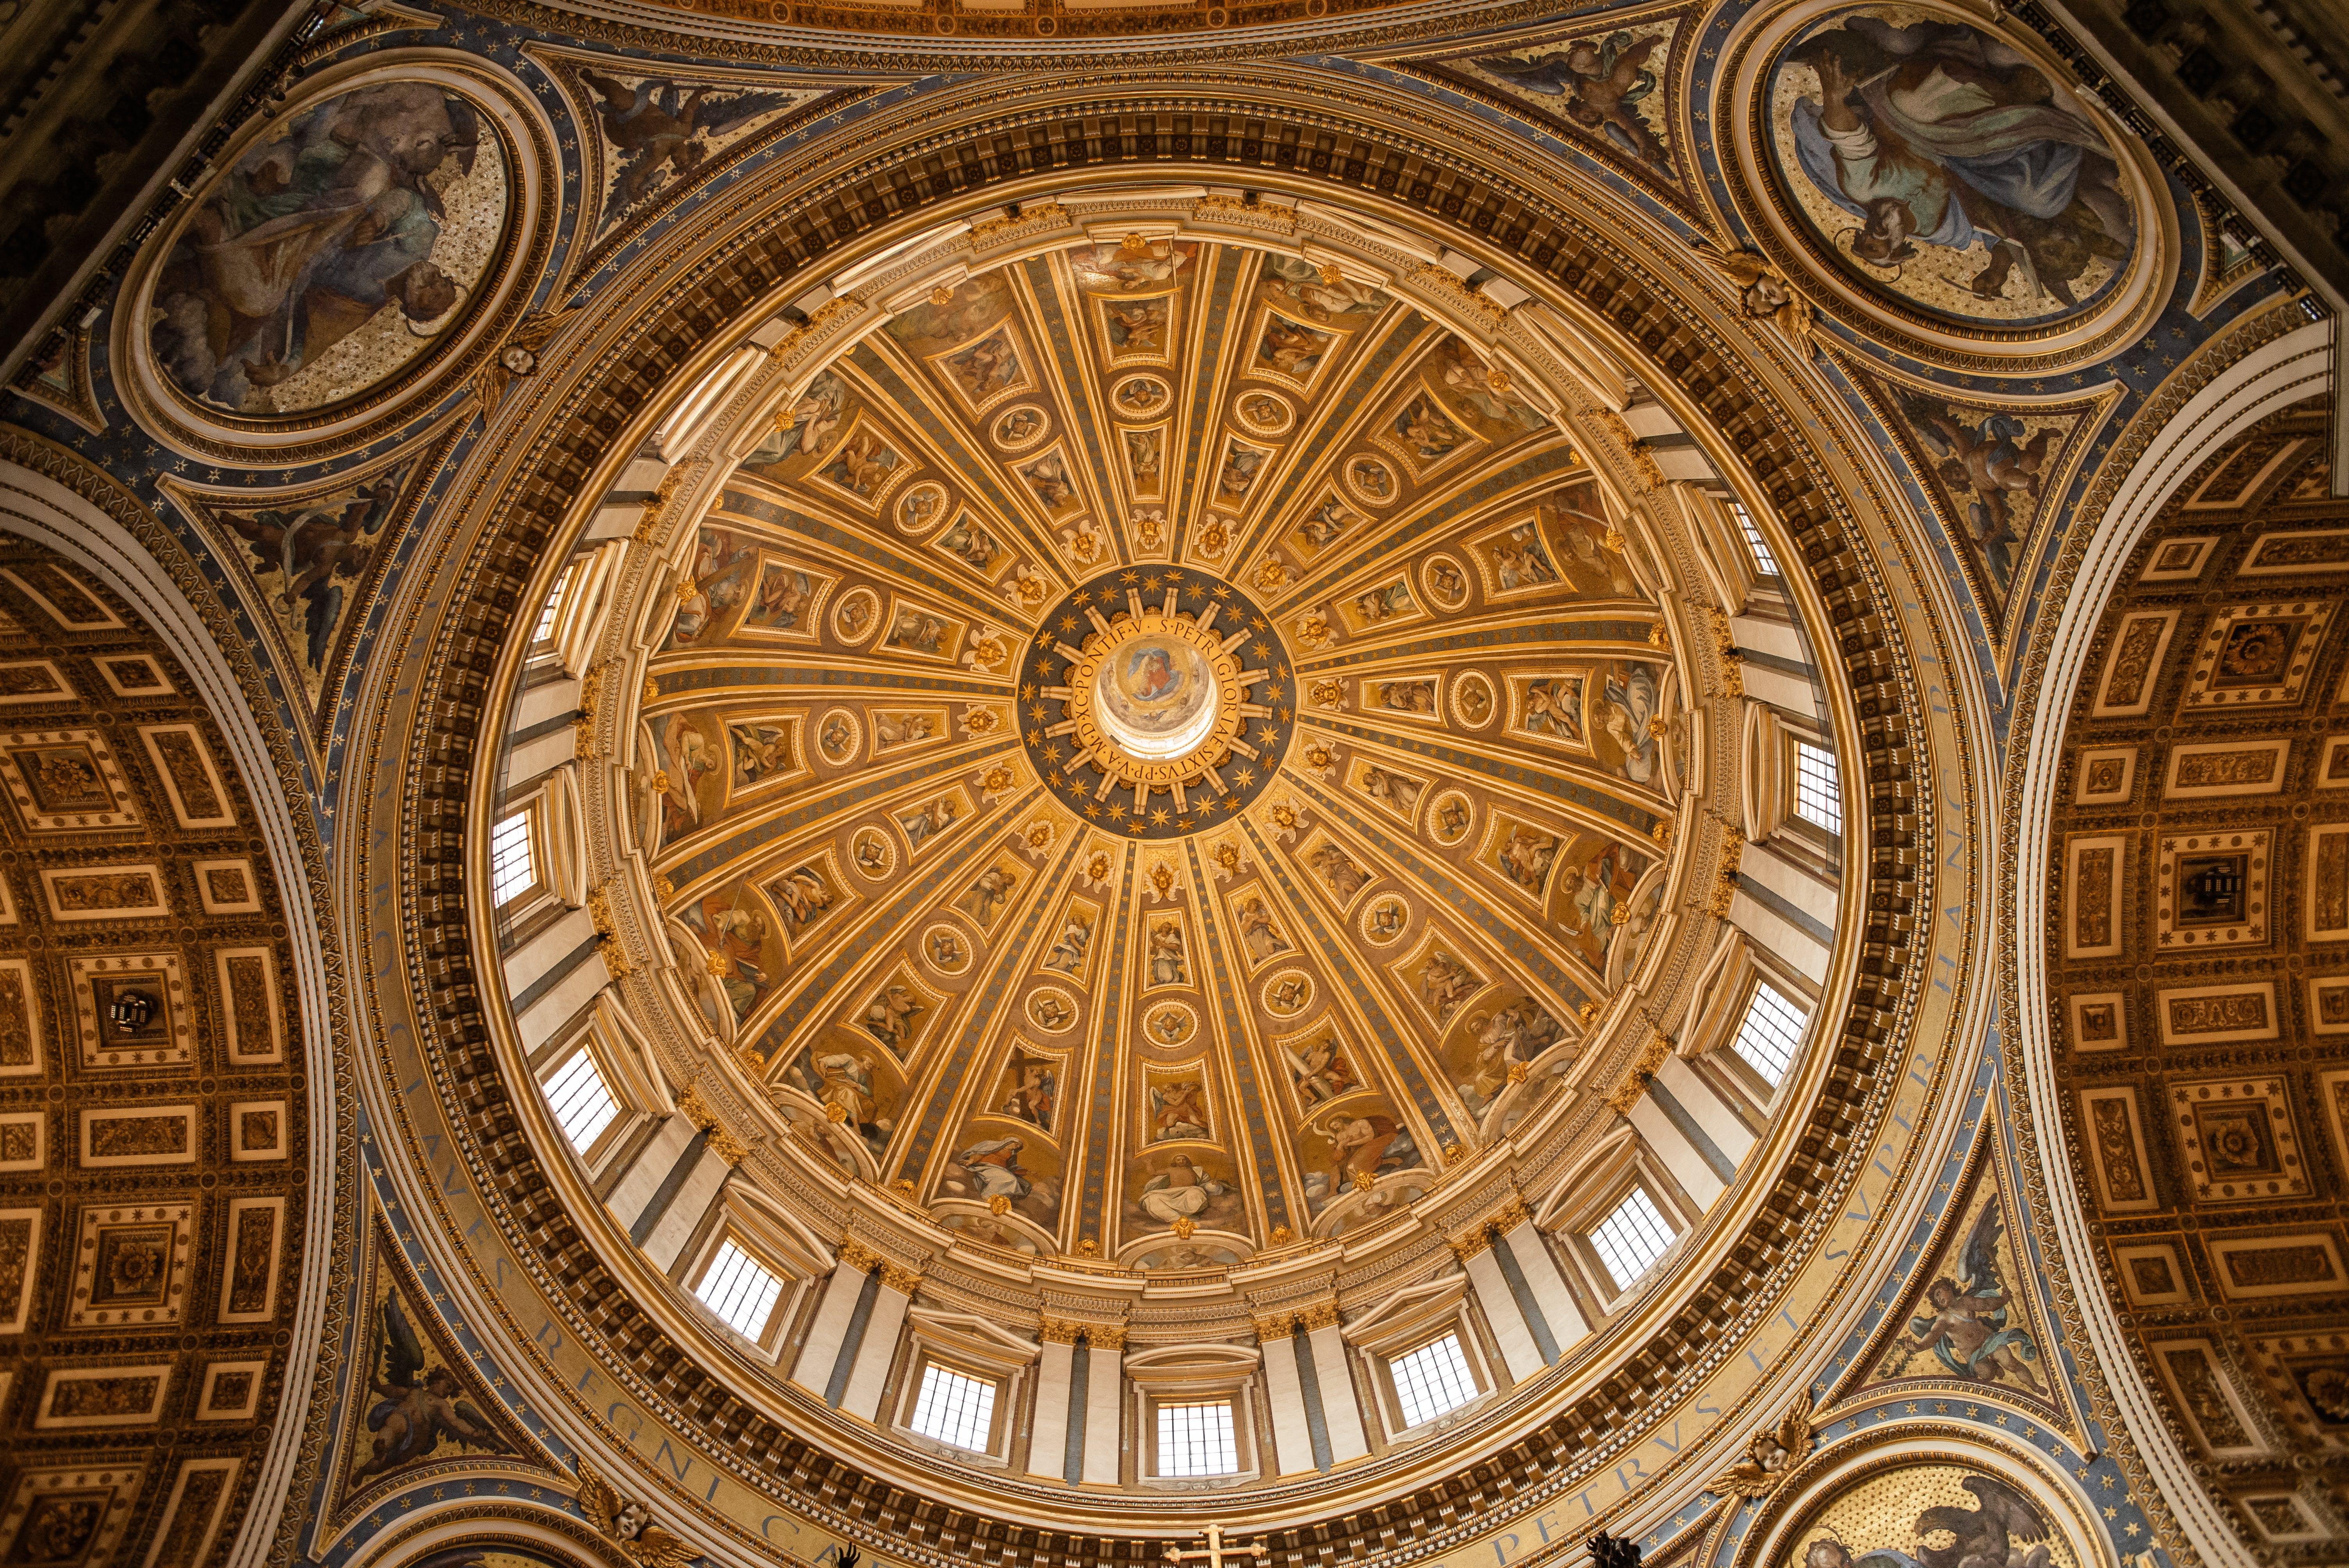 St. Peter's Basilica Dome